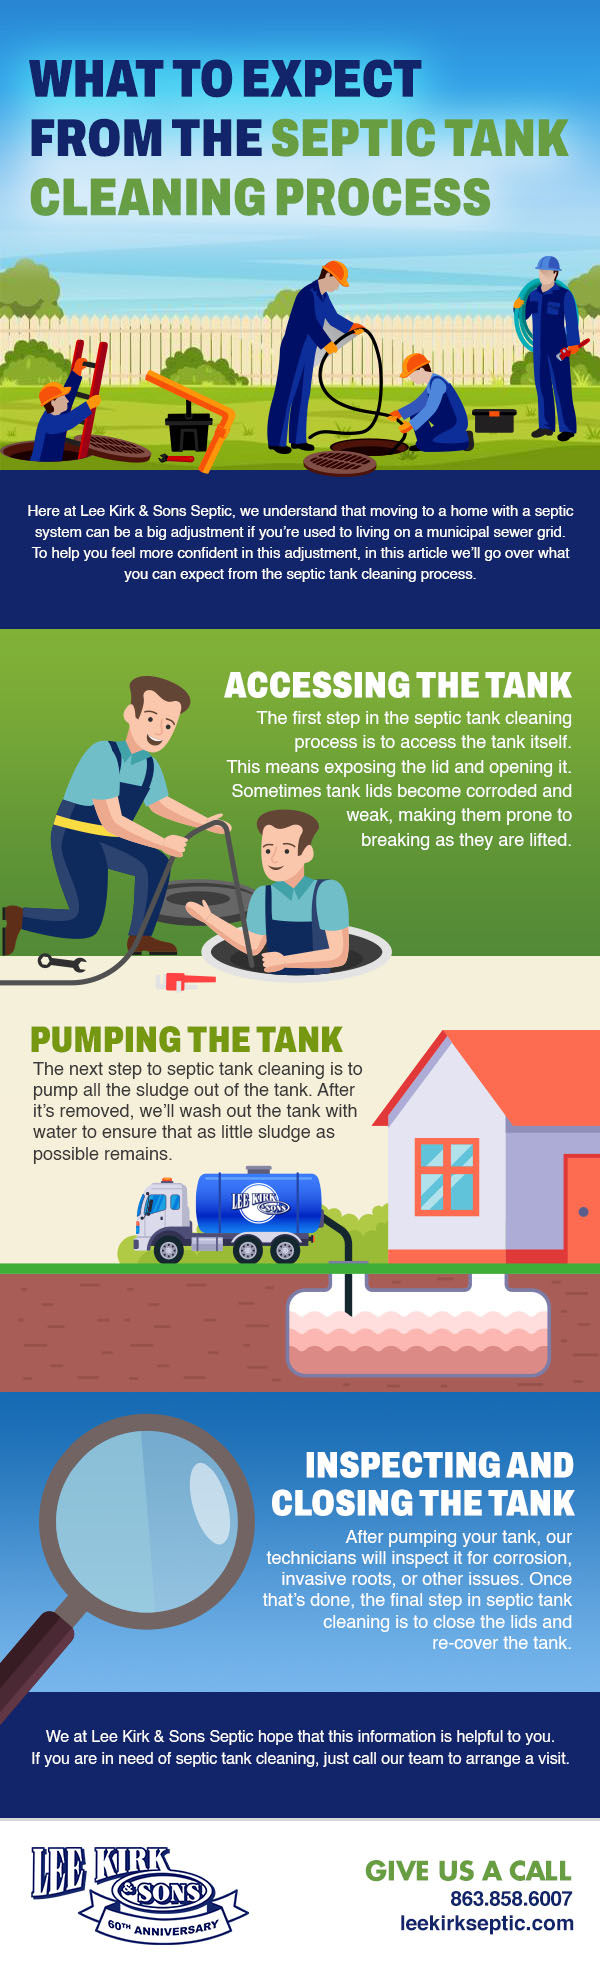 What to Expect from the Septic Tank Cleaning Process 